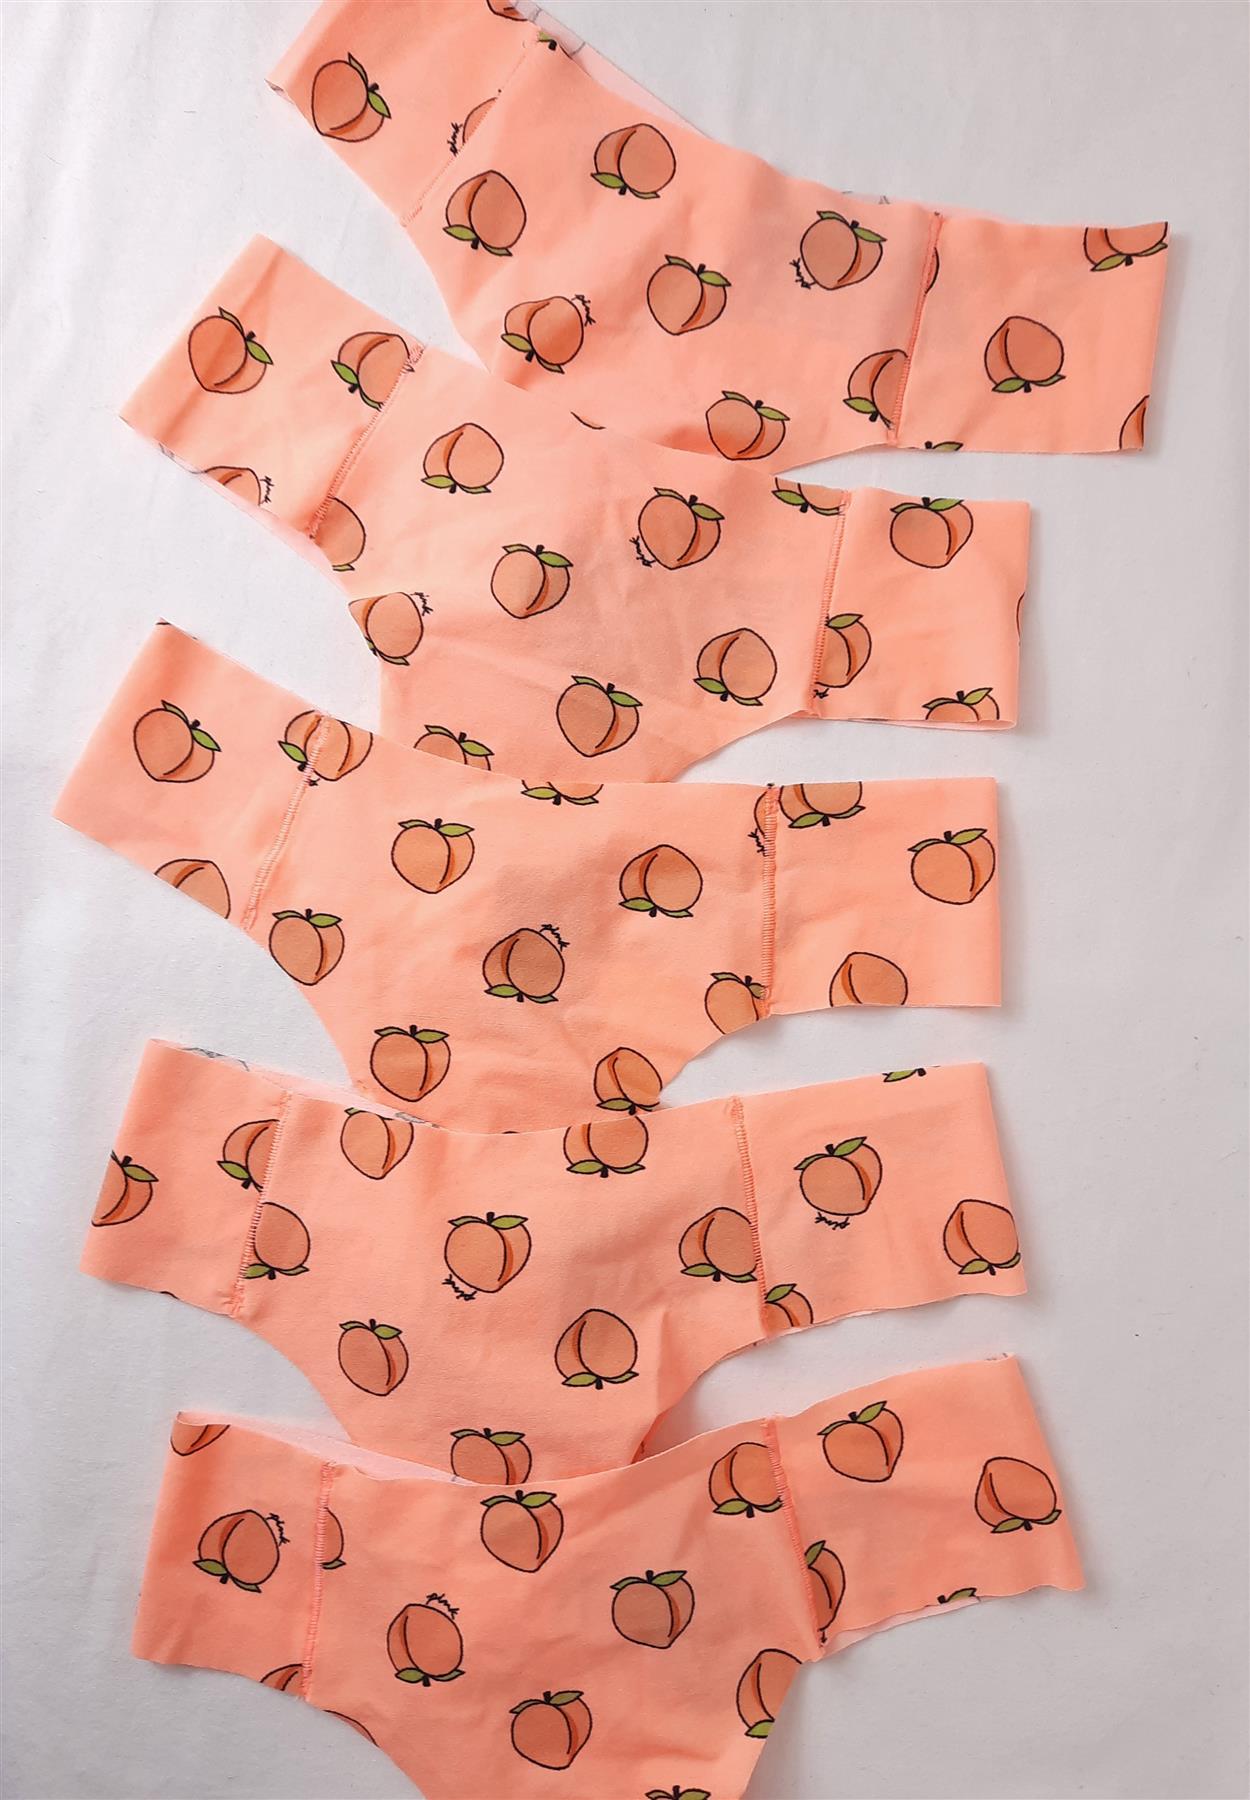 5x No-VPL Thongs Peach Cotton-Lined Multipack Fashion Brand Knickers Size 4-6